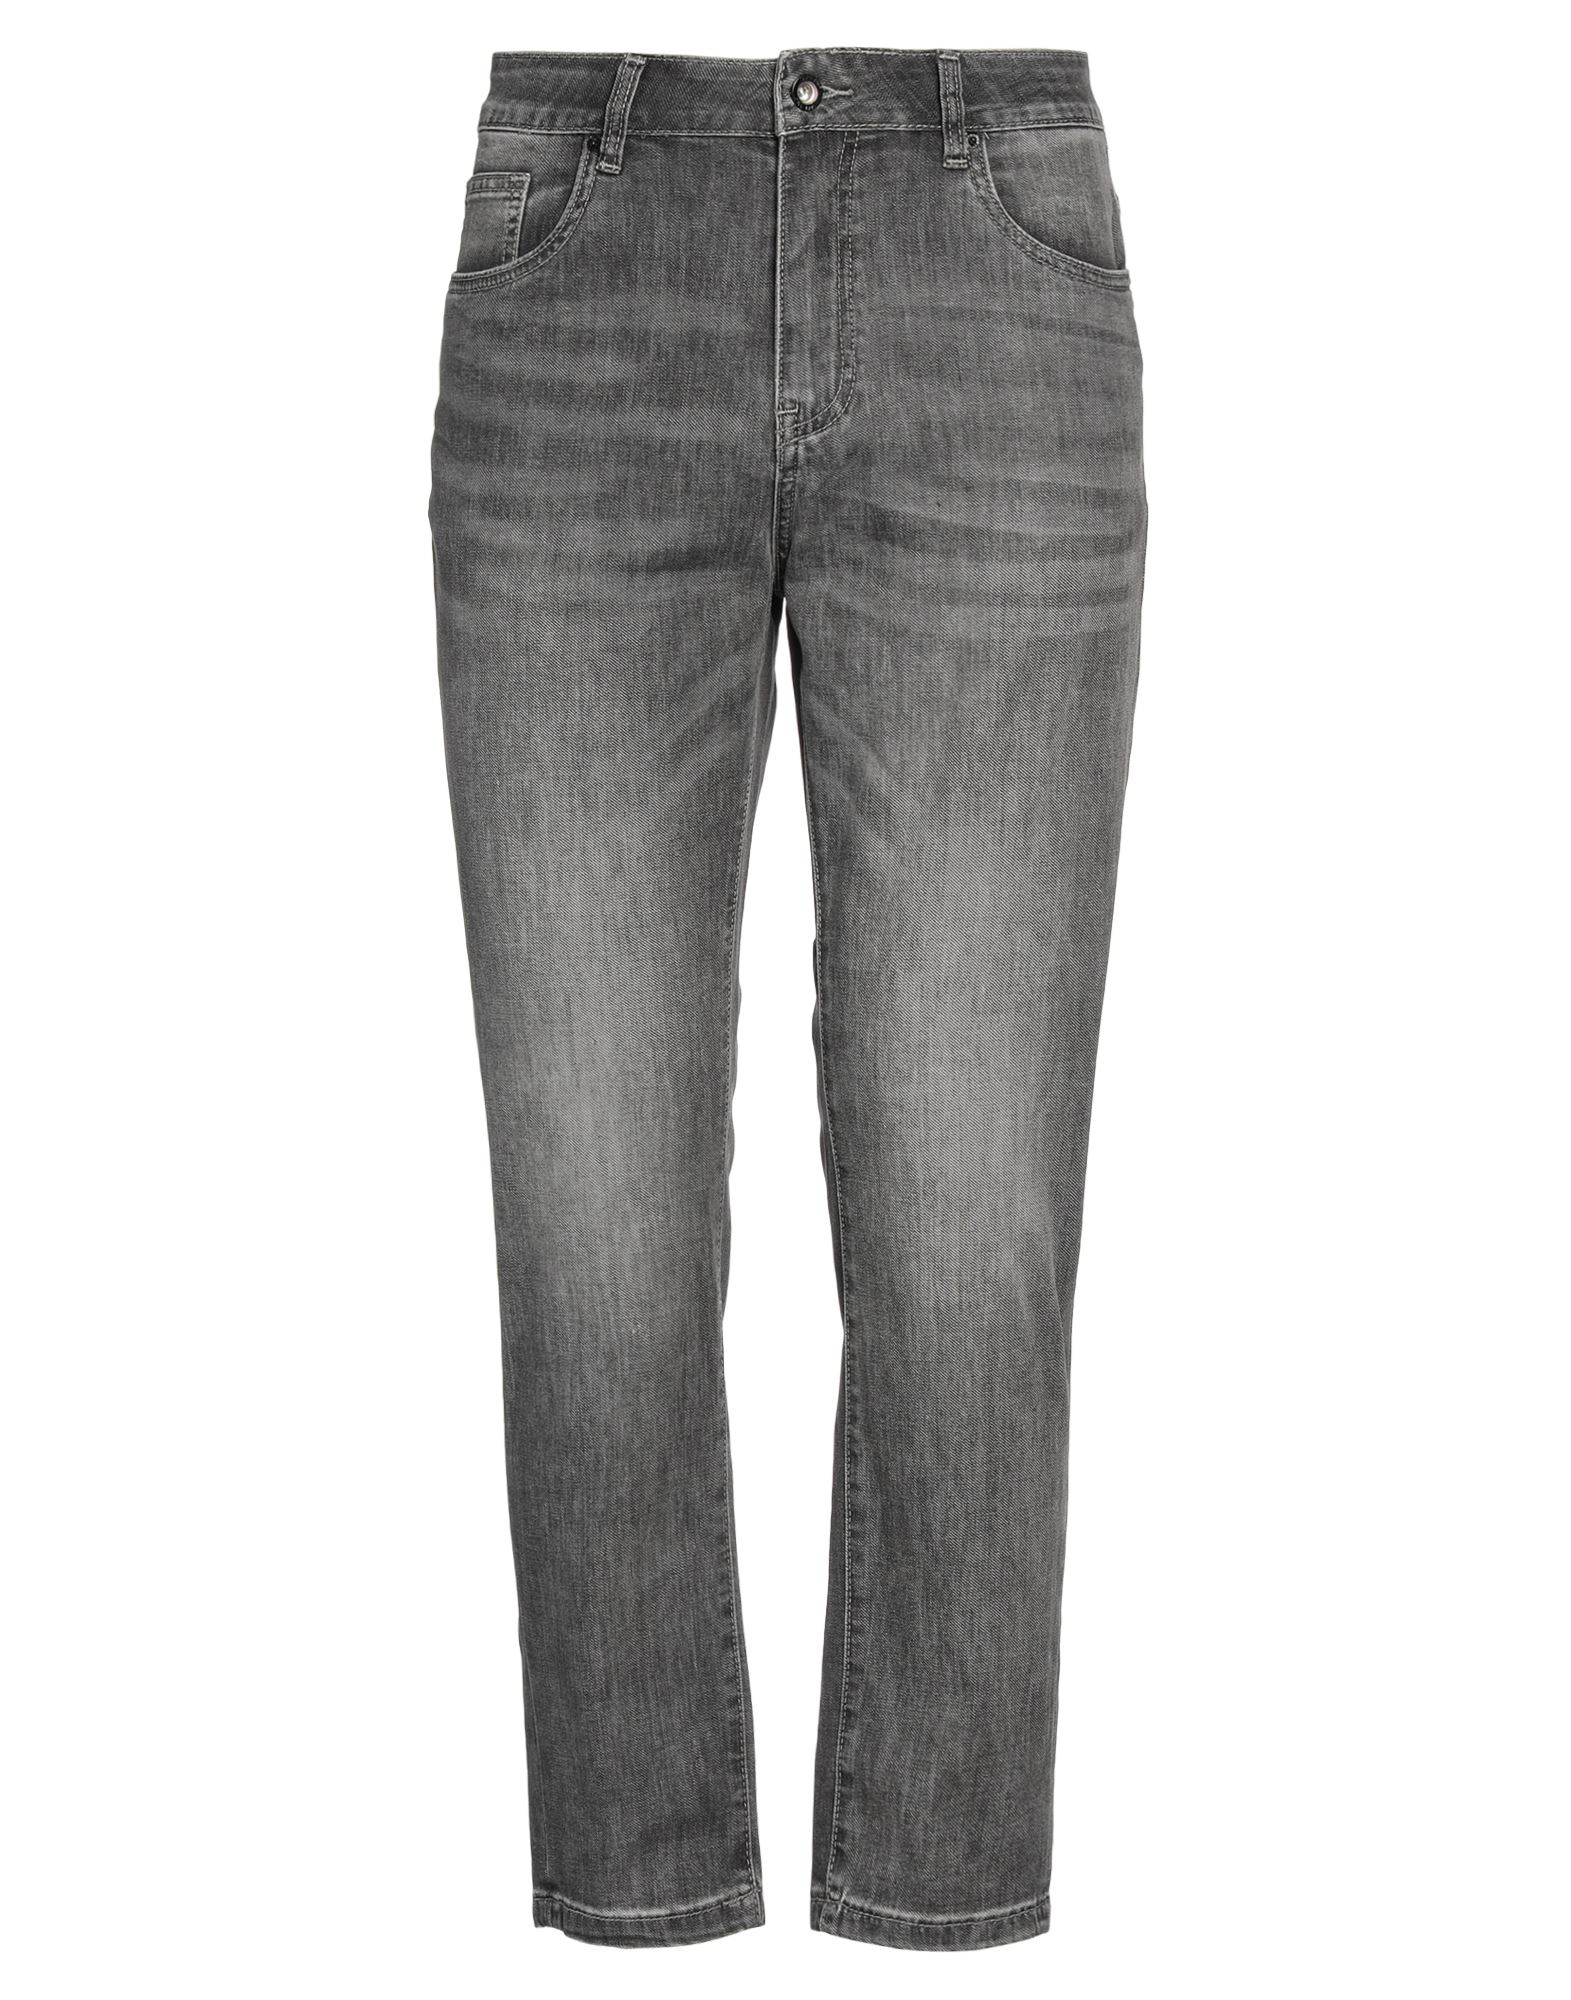 Take-two Jeans In Grey | ModeSens